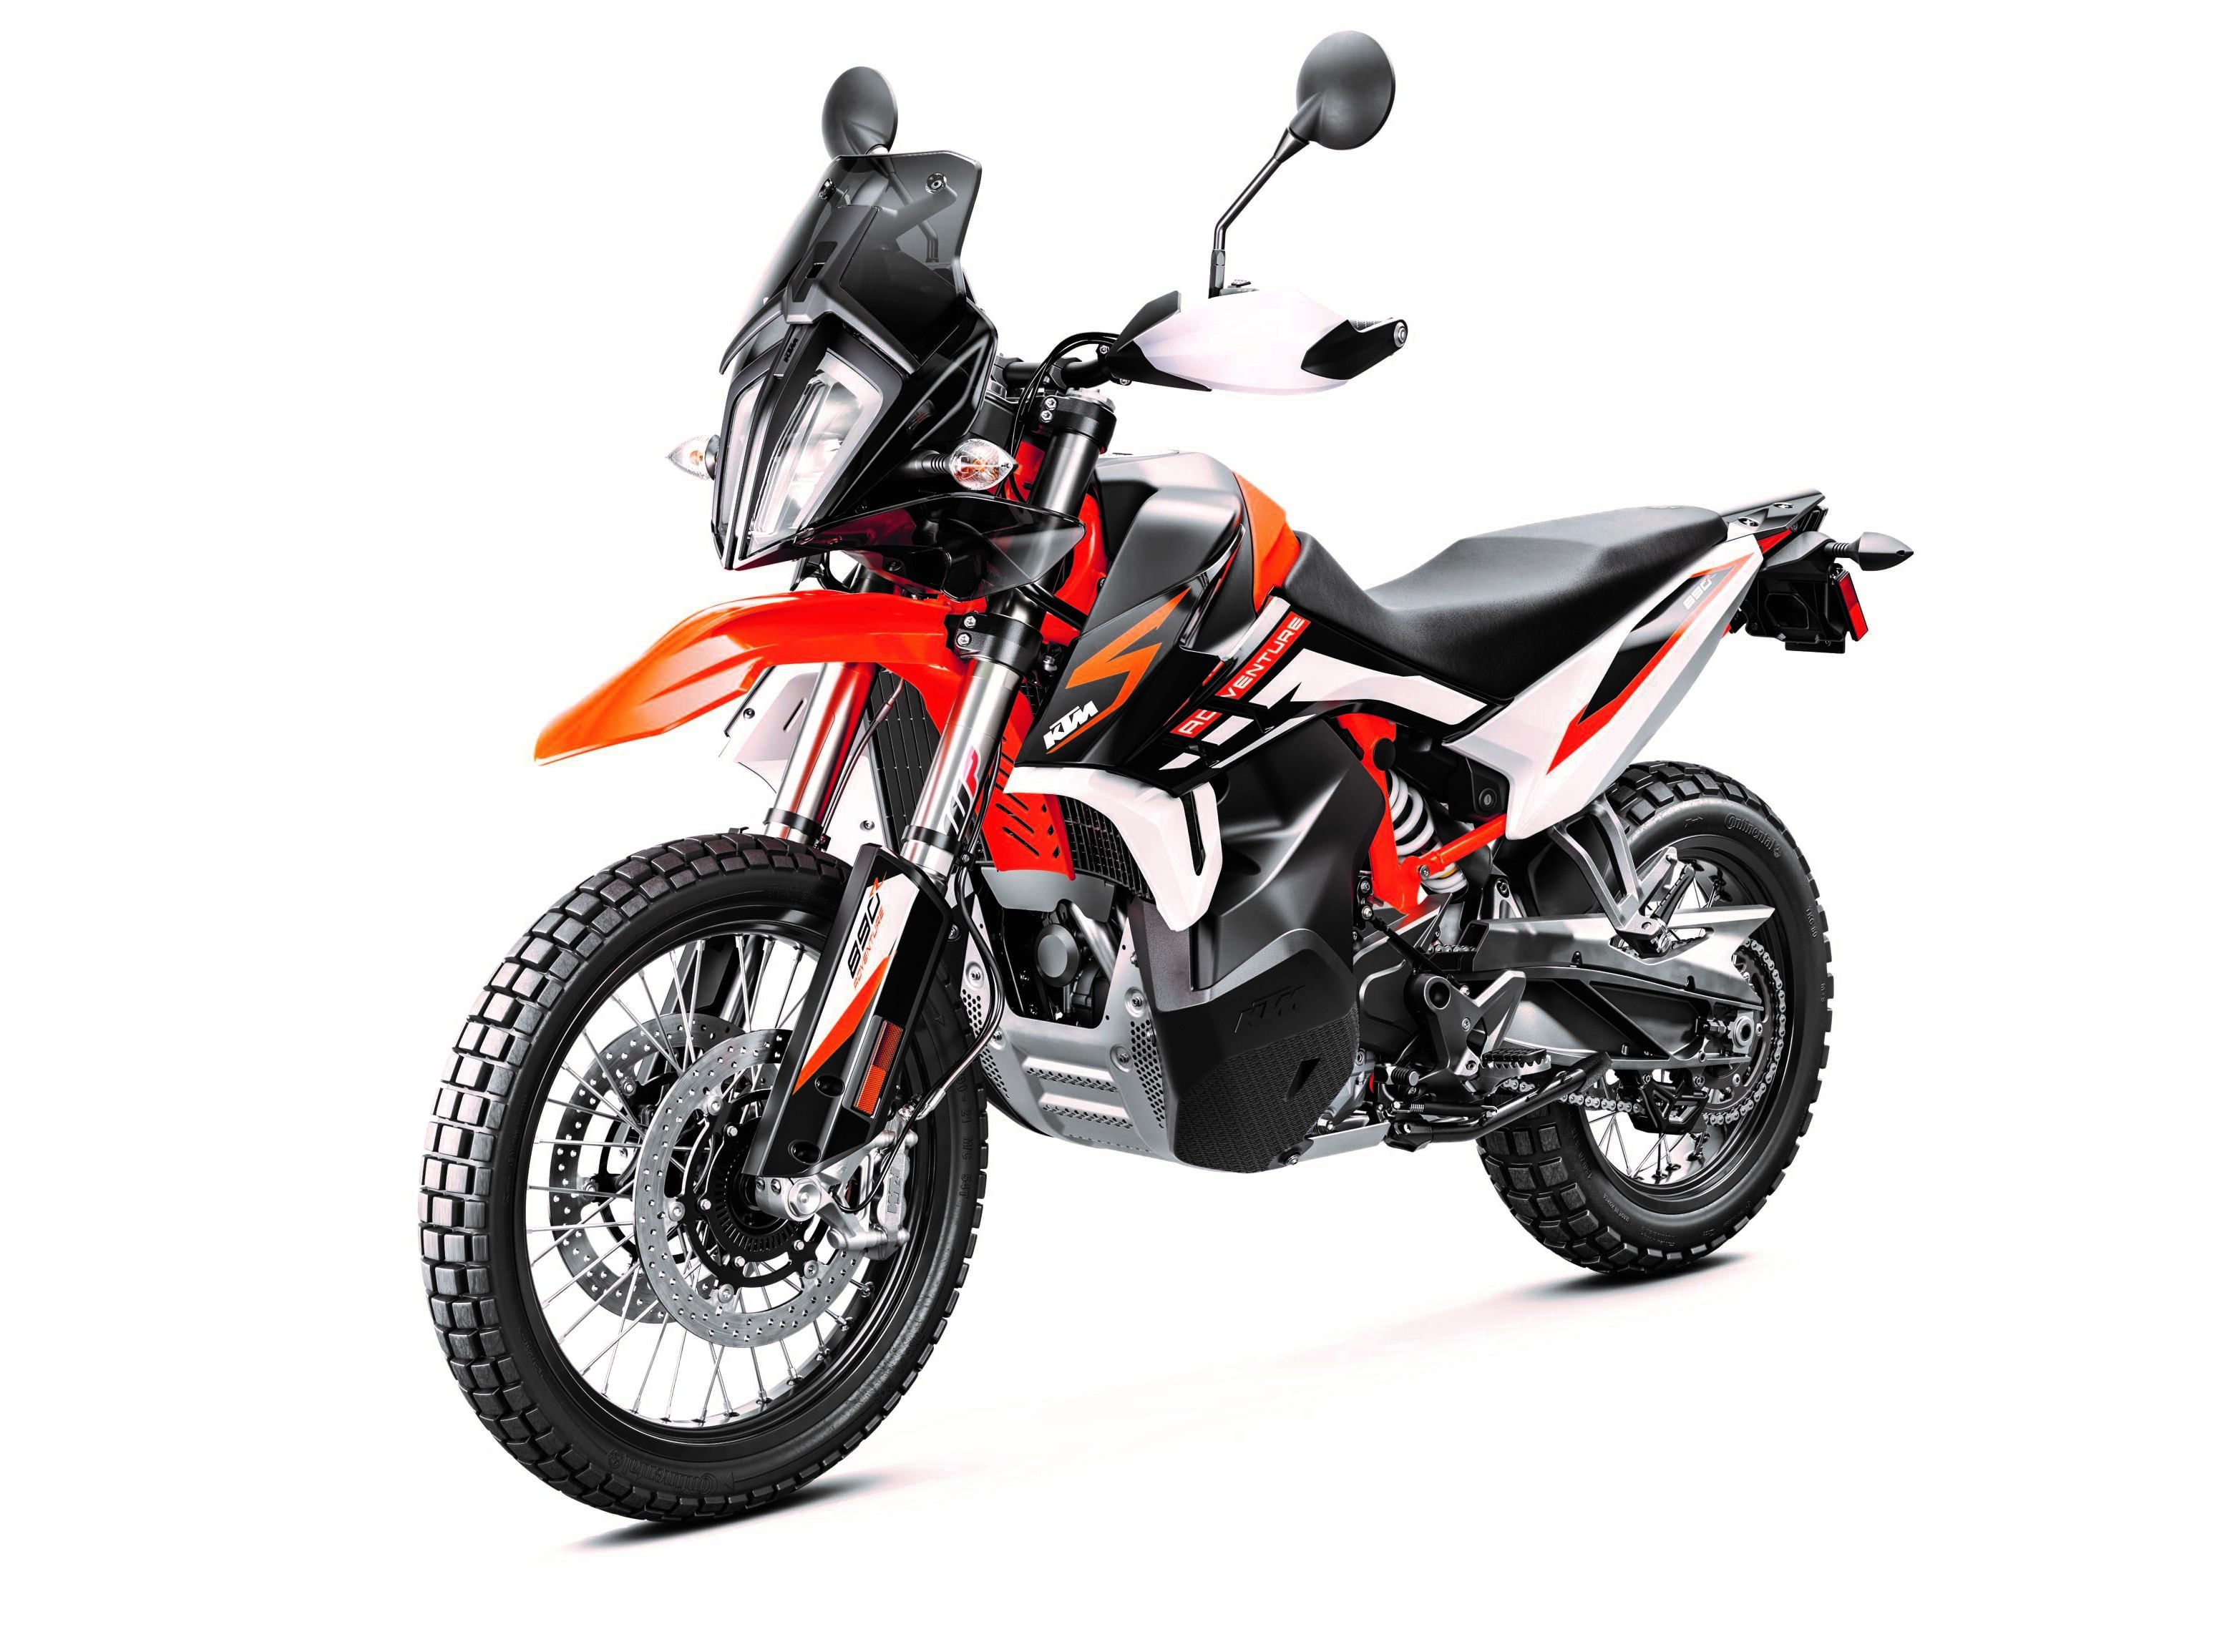 The KTM 890 Adventure and Adventure R, lend a lot of parts to this new 890 SMT.